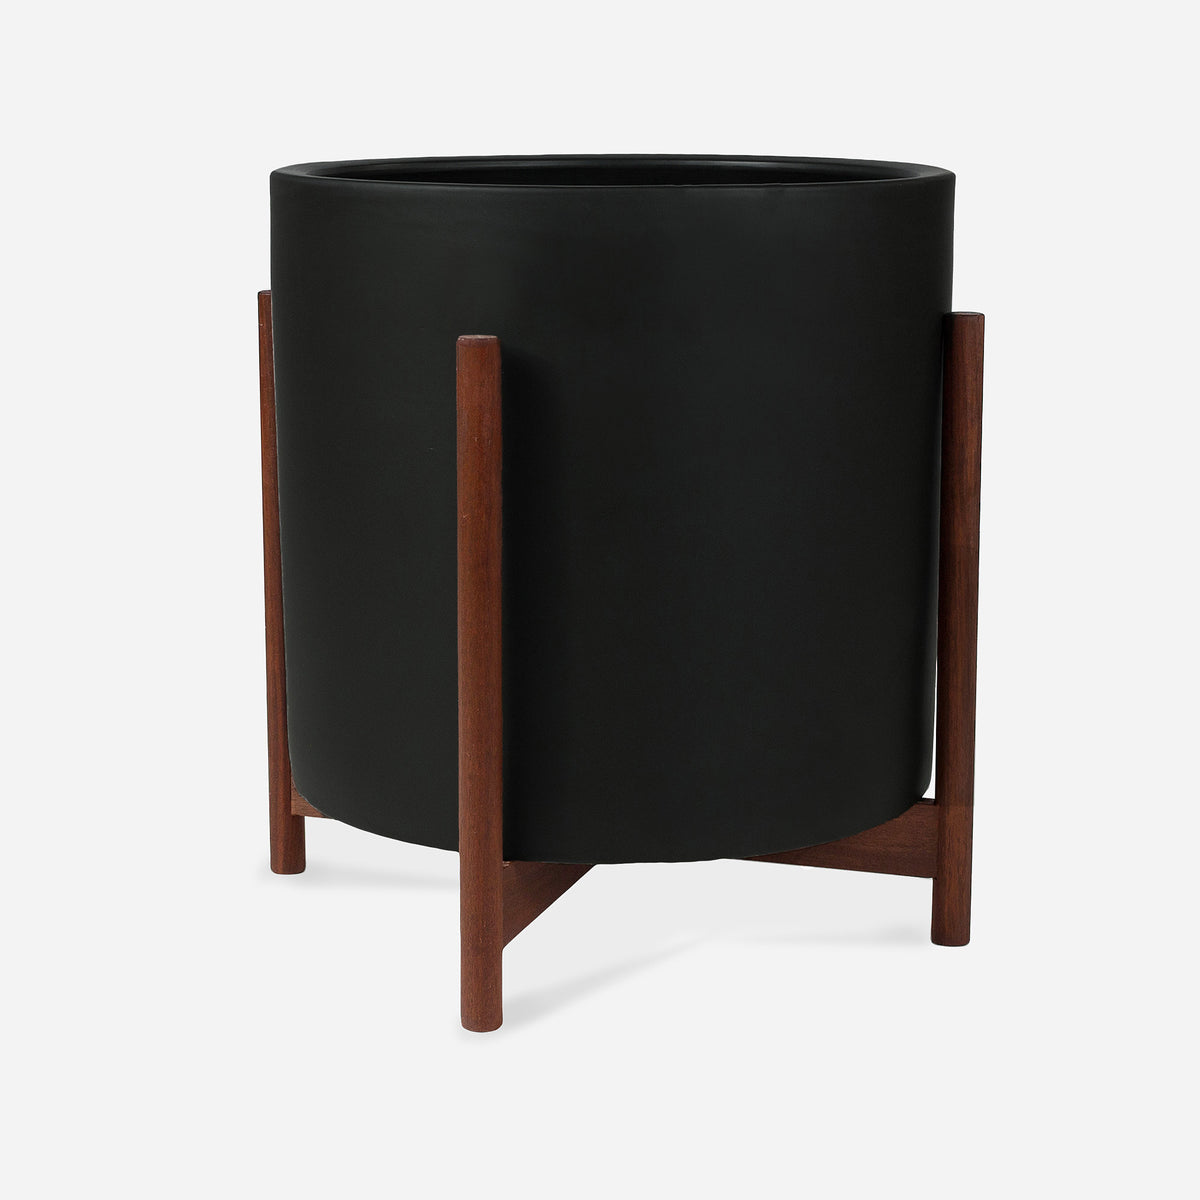 Case Study® Ceramics Large Cylinder with Stand – Modernica Inc